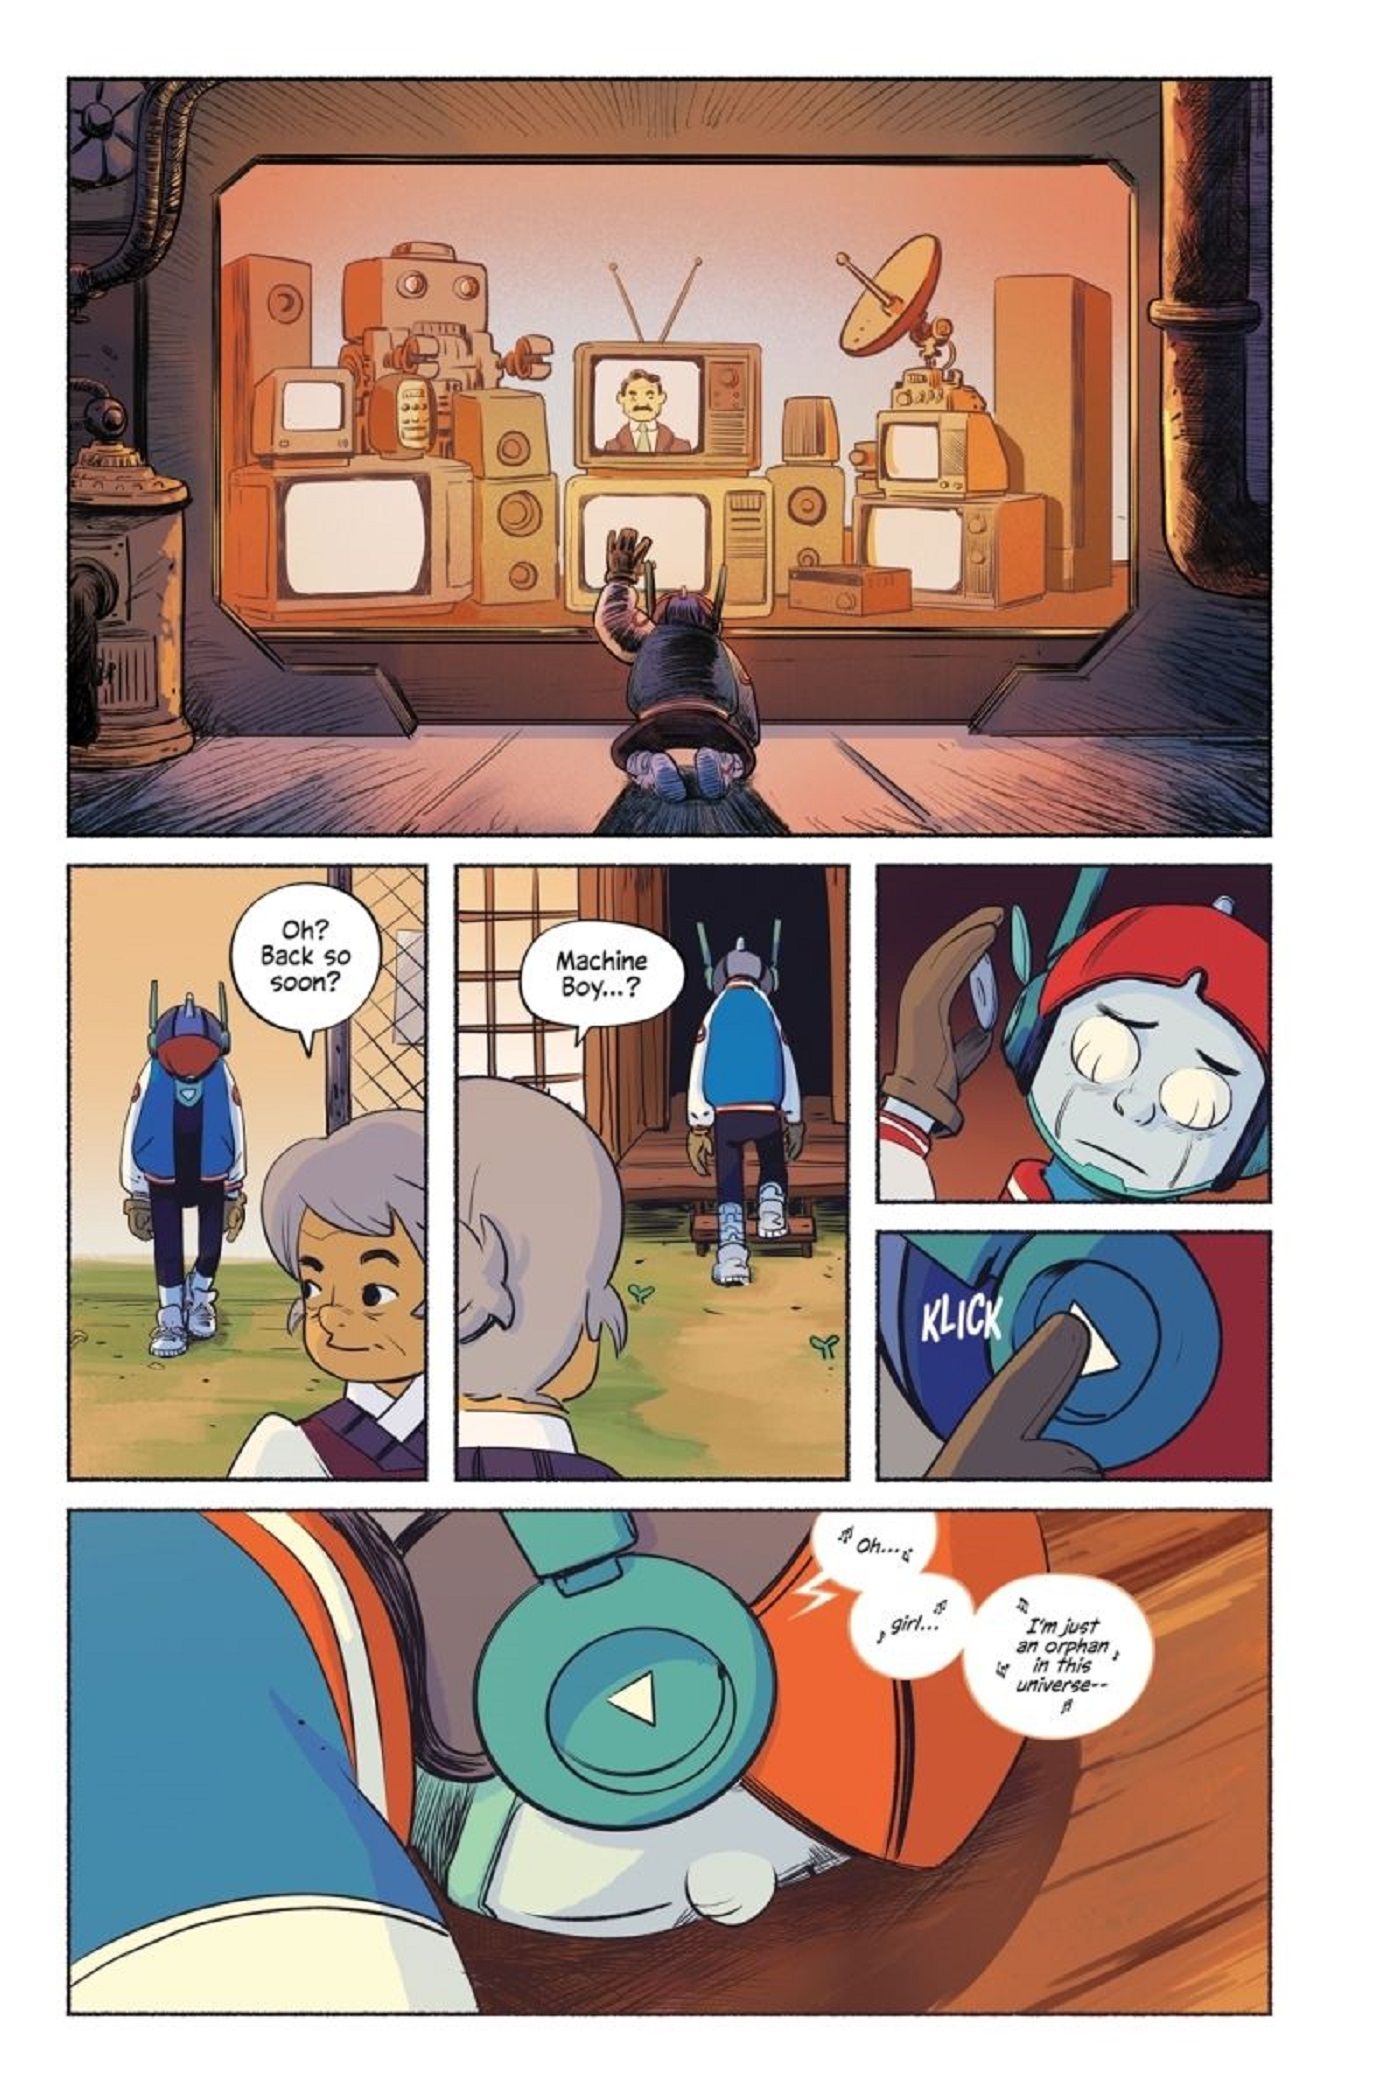 Everyday Hero Machine Boy OGN Preview Page 10